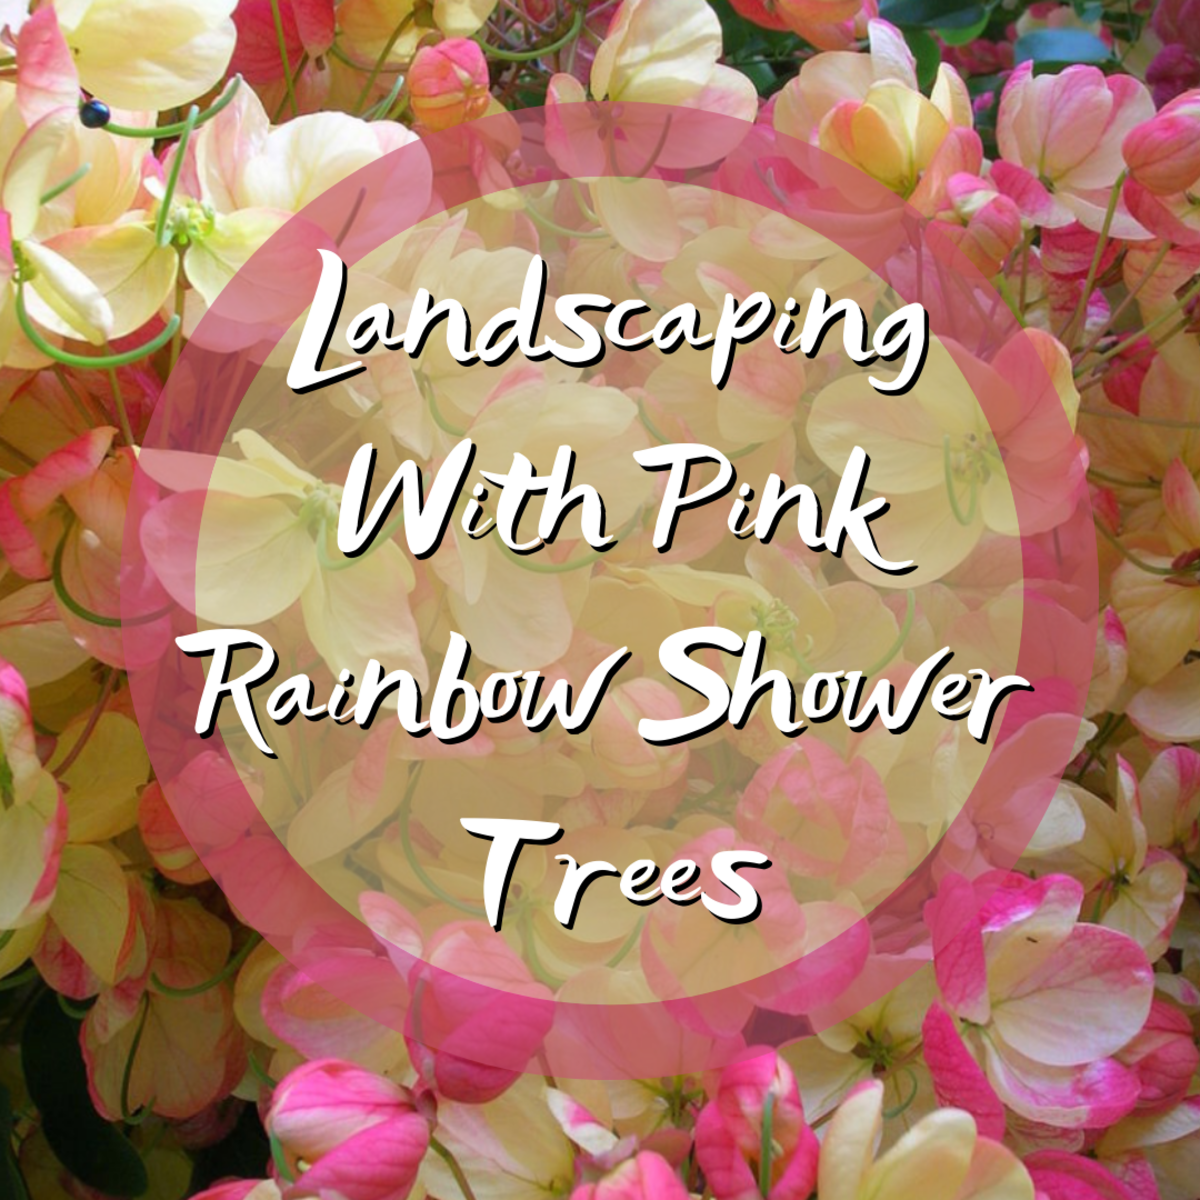 Learn about the Pink Rainbow Shower tree and how to best landscape with it. You'll also learn how to care for a Golden Shower tree.